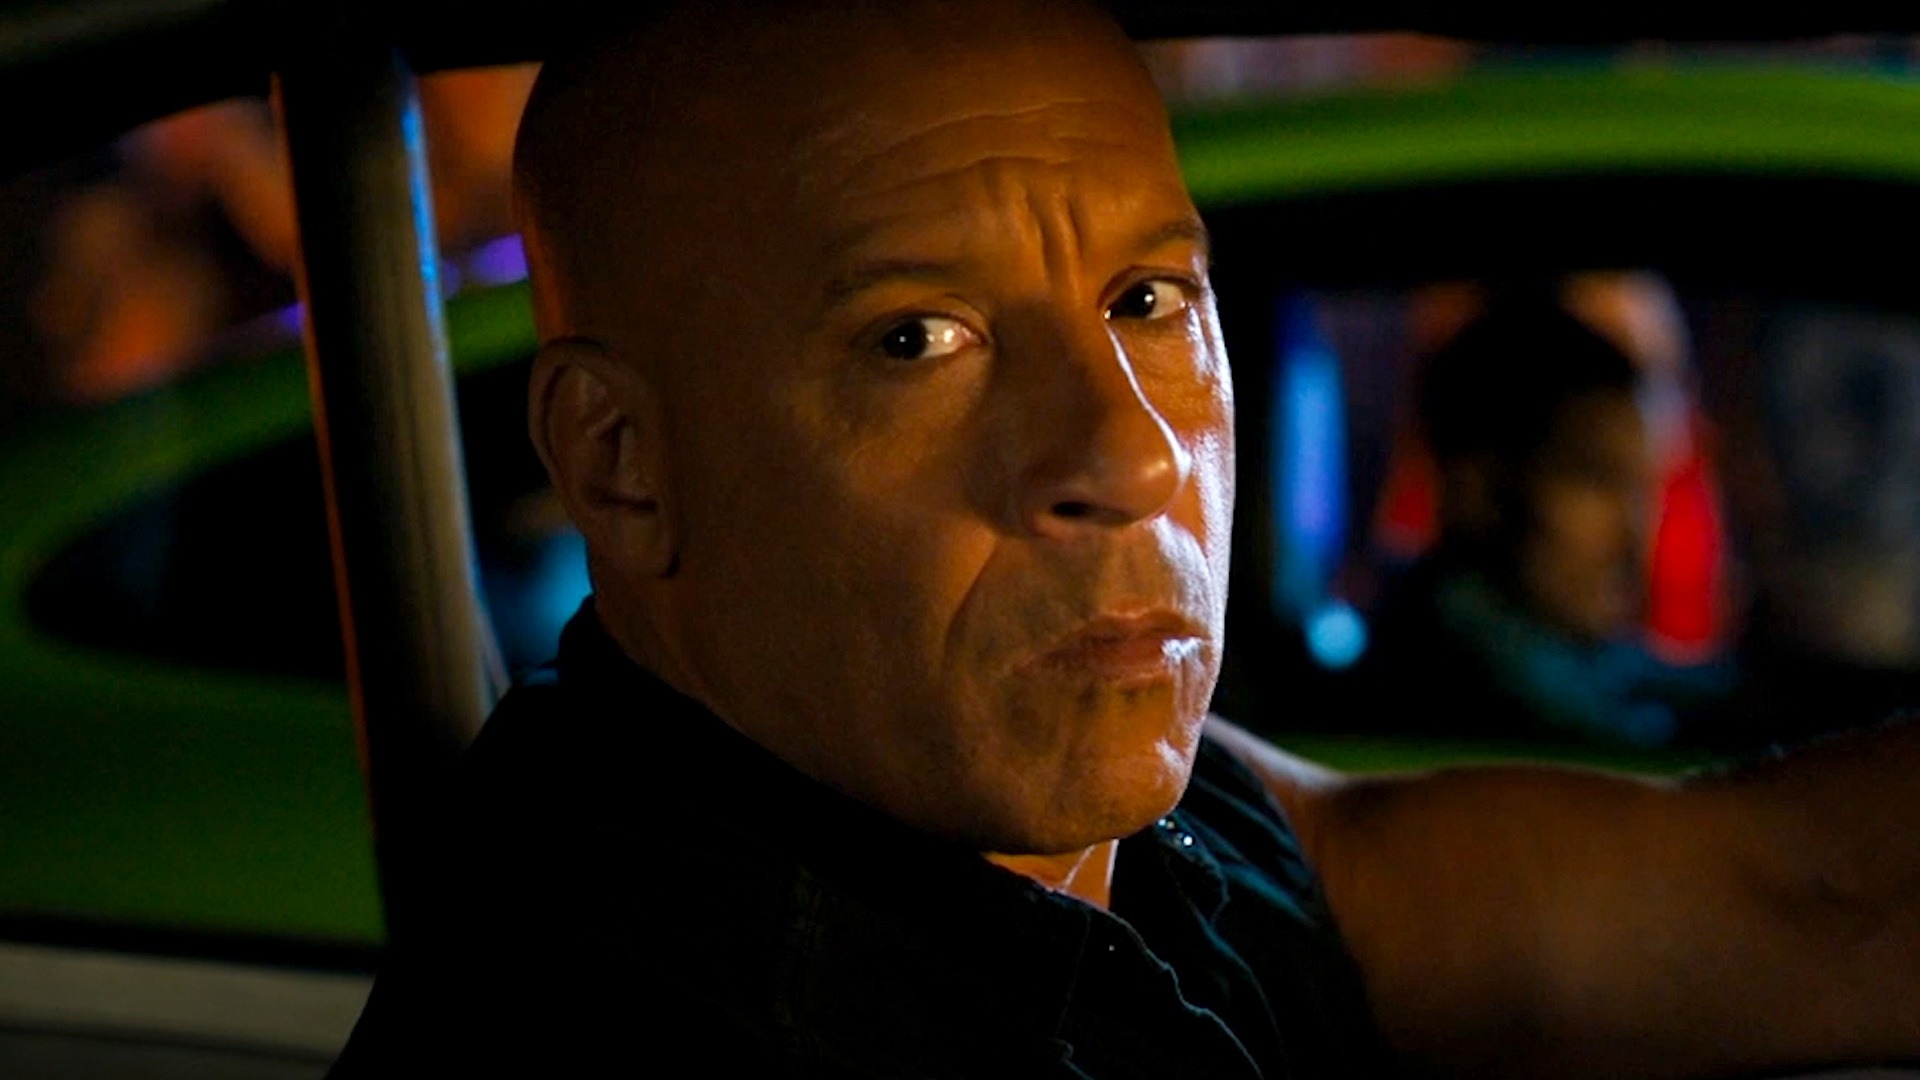 The Fast and the Furious - Trailers & Videos - Rotten Tomatoes